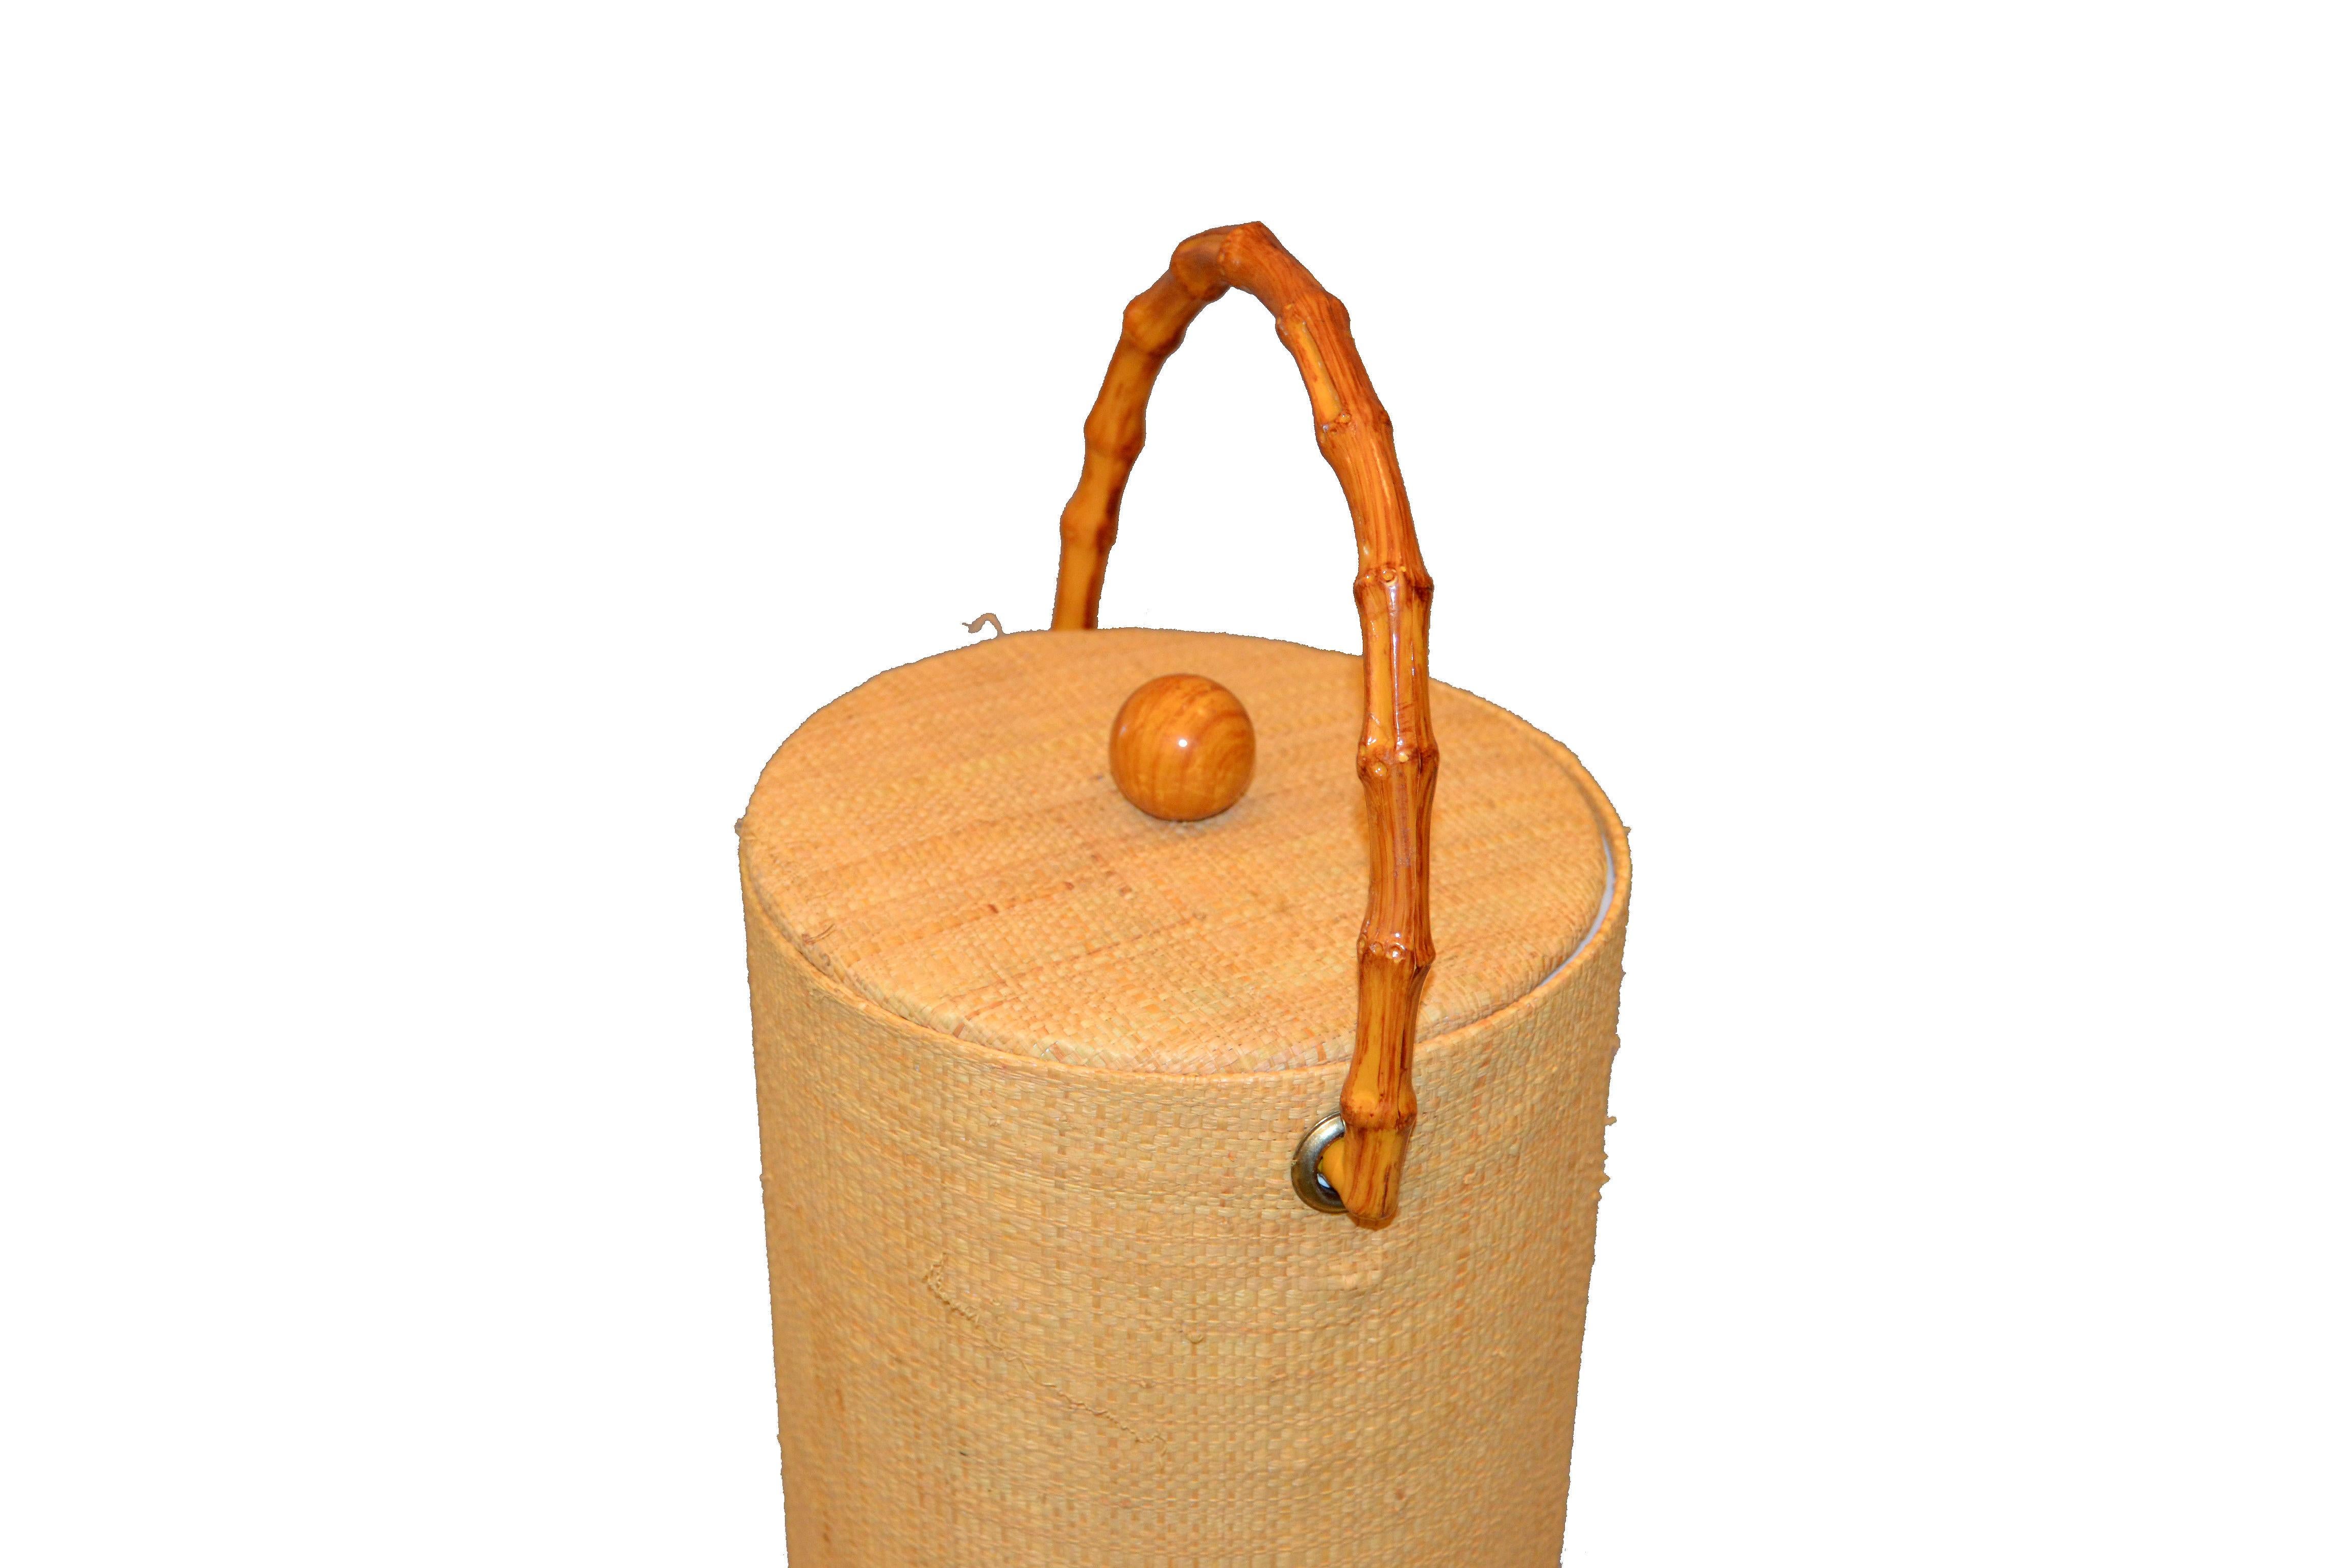 American Mid-Century Modern Handwoven Cane & Bamboo Insulated Ice Bucket with Lid